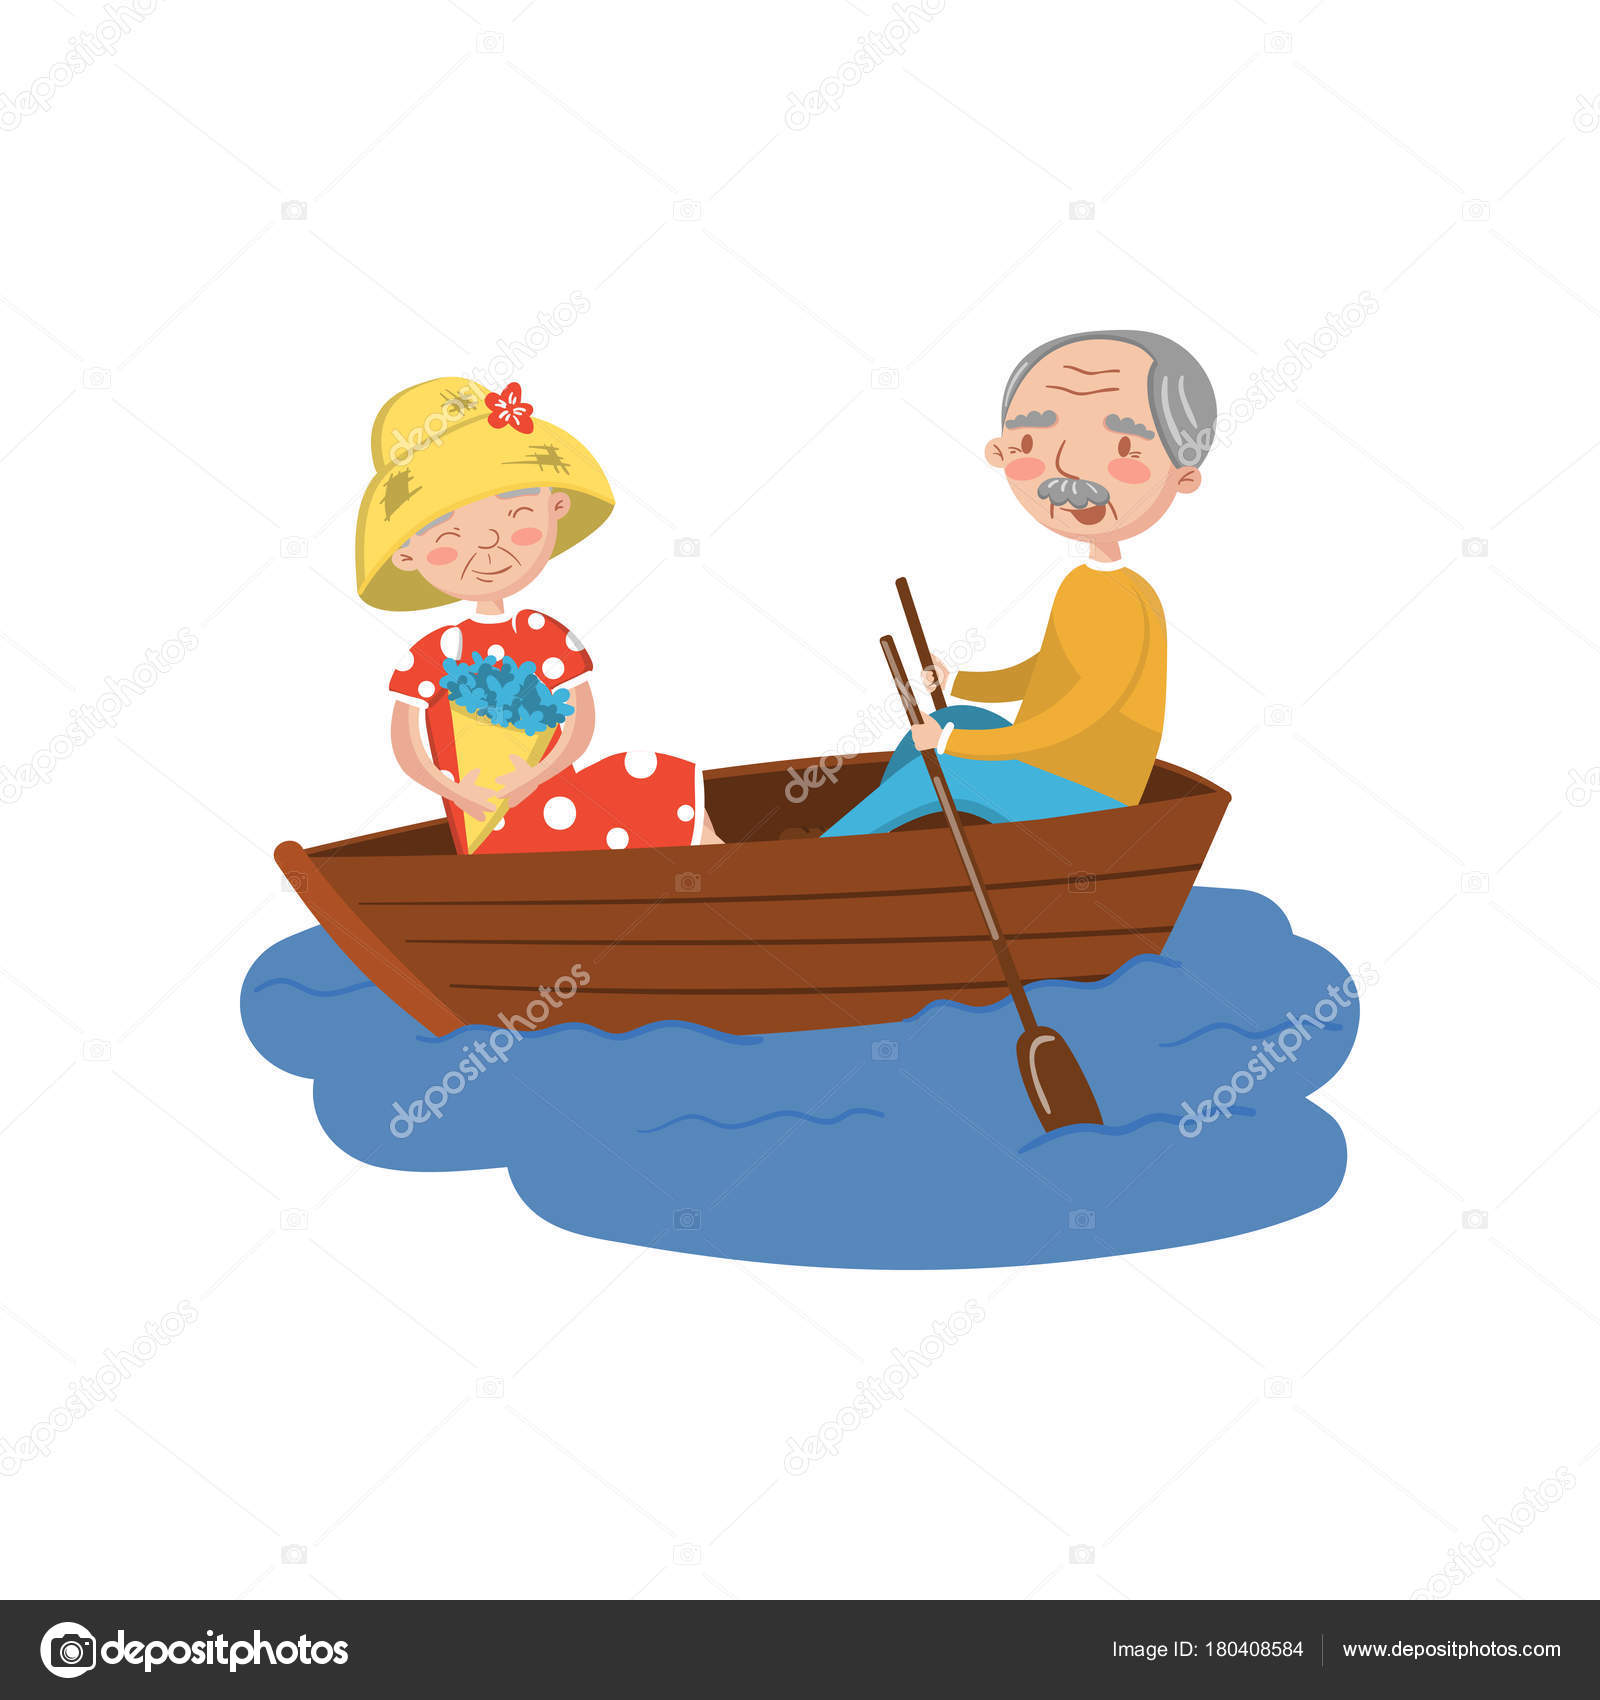 Happy Senior Couple Rowing A Boat On Lake Cartoon Vector Illustration Vector Image By C Happypictures Vector Stock 180408584